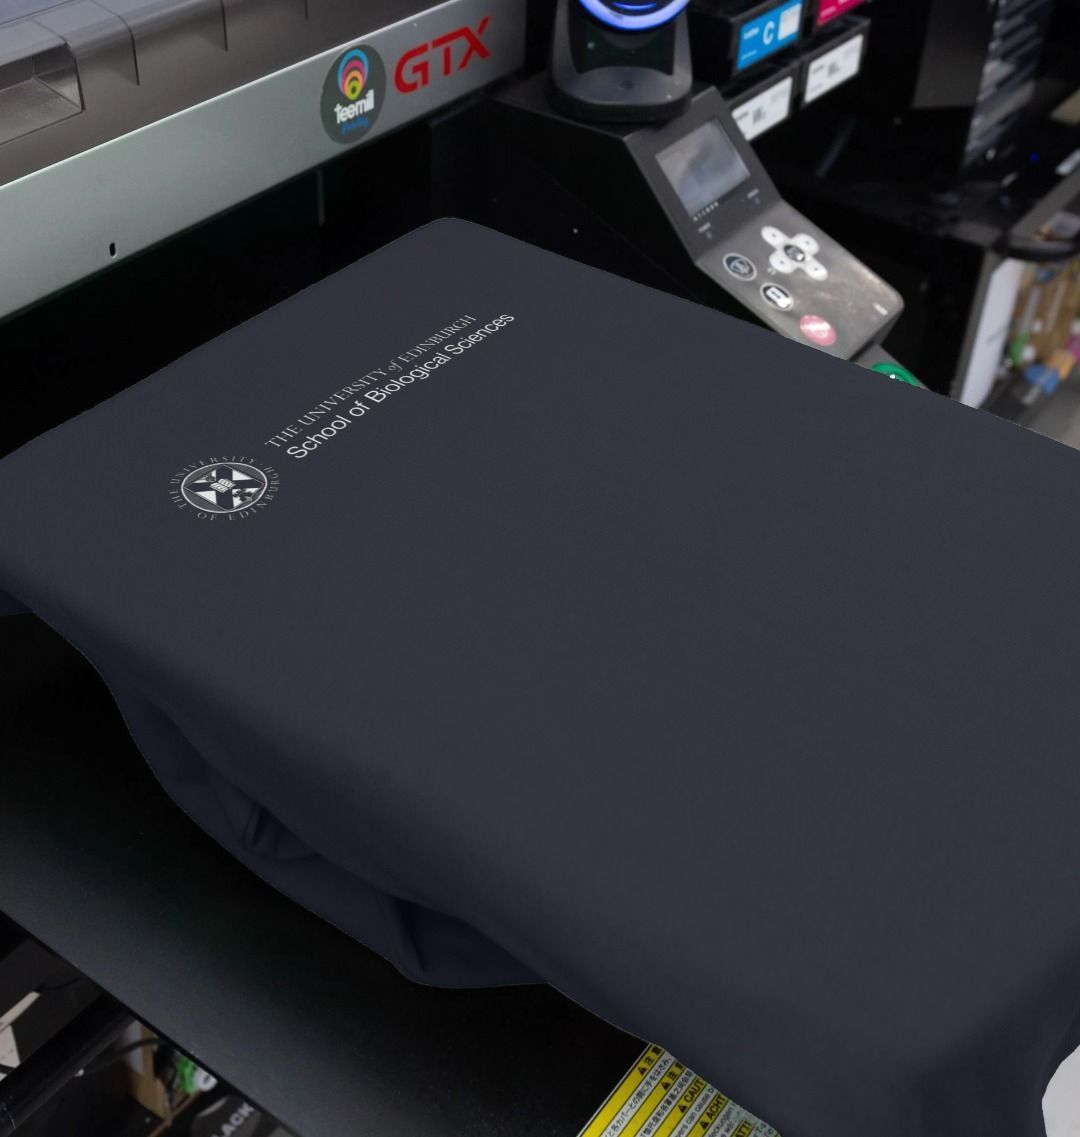 Our School of Biological Sciences Sweatshirt being printed by our print on demand partner, teemill